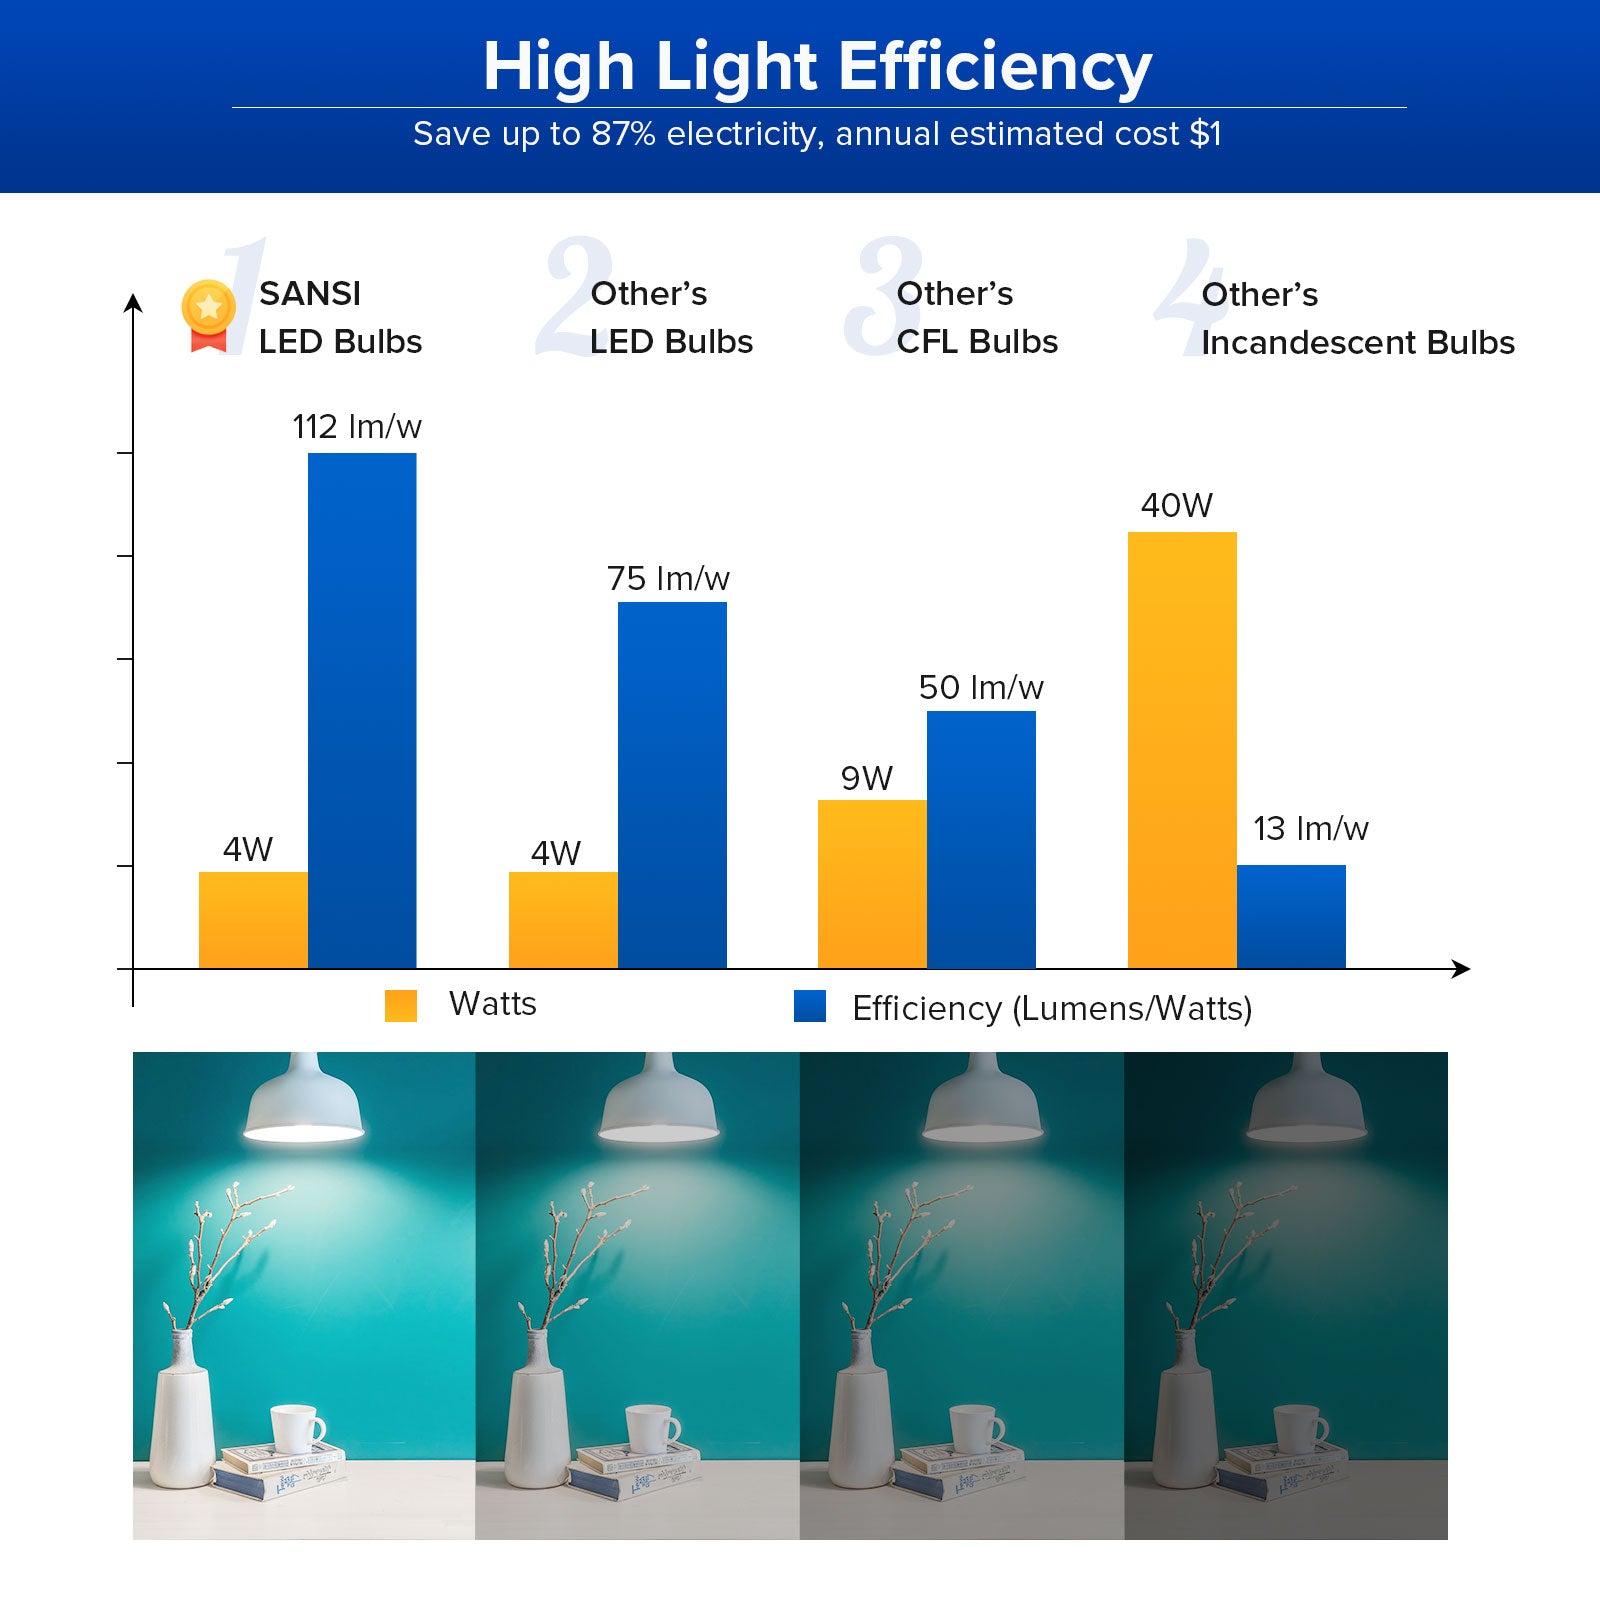 A11 4W LED Light Bulb has high light efficiency, save up to 87% electricity, annual estimated cost $1